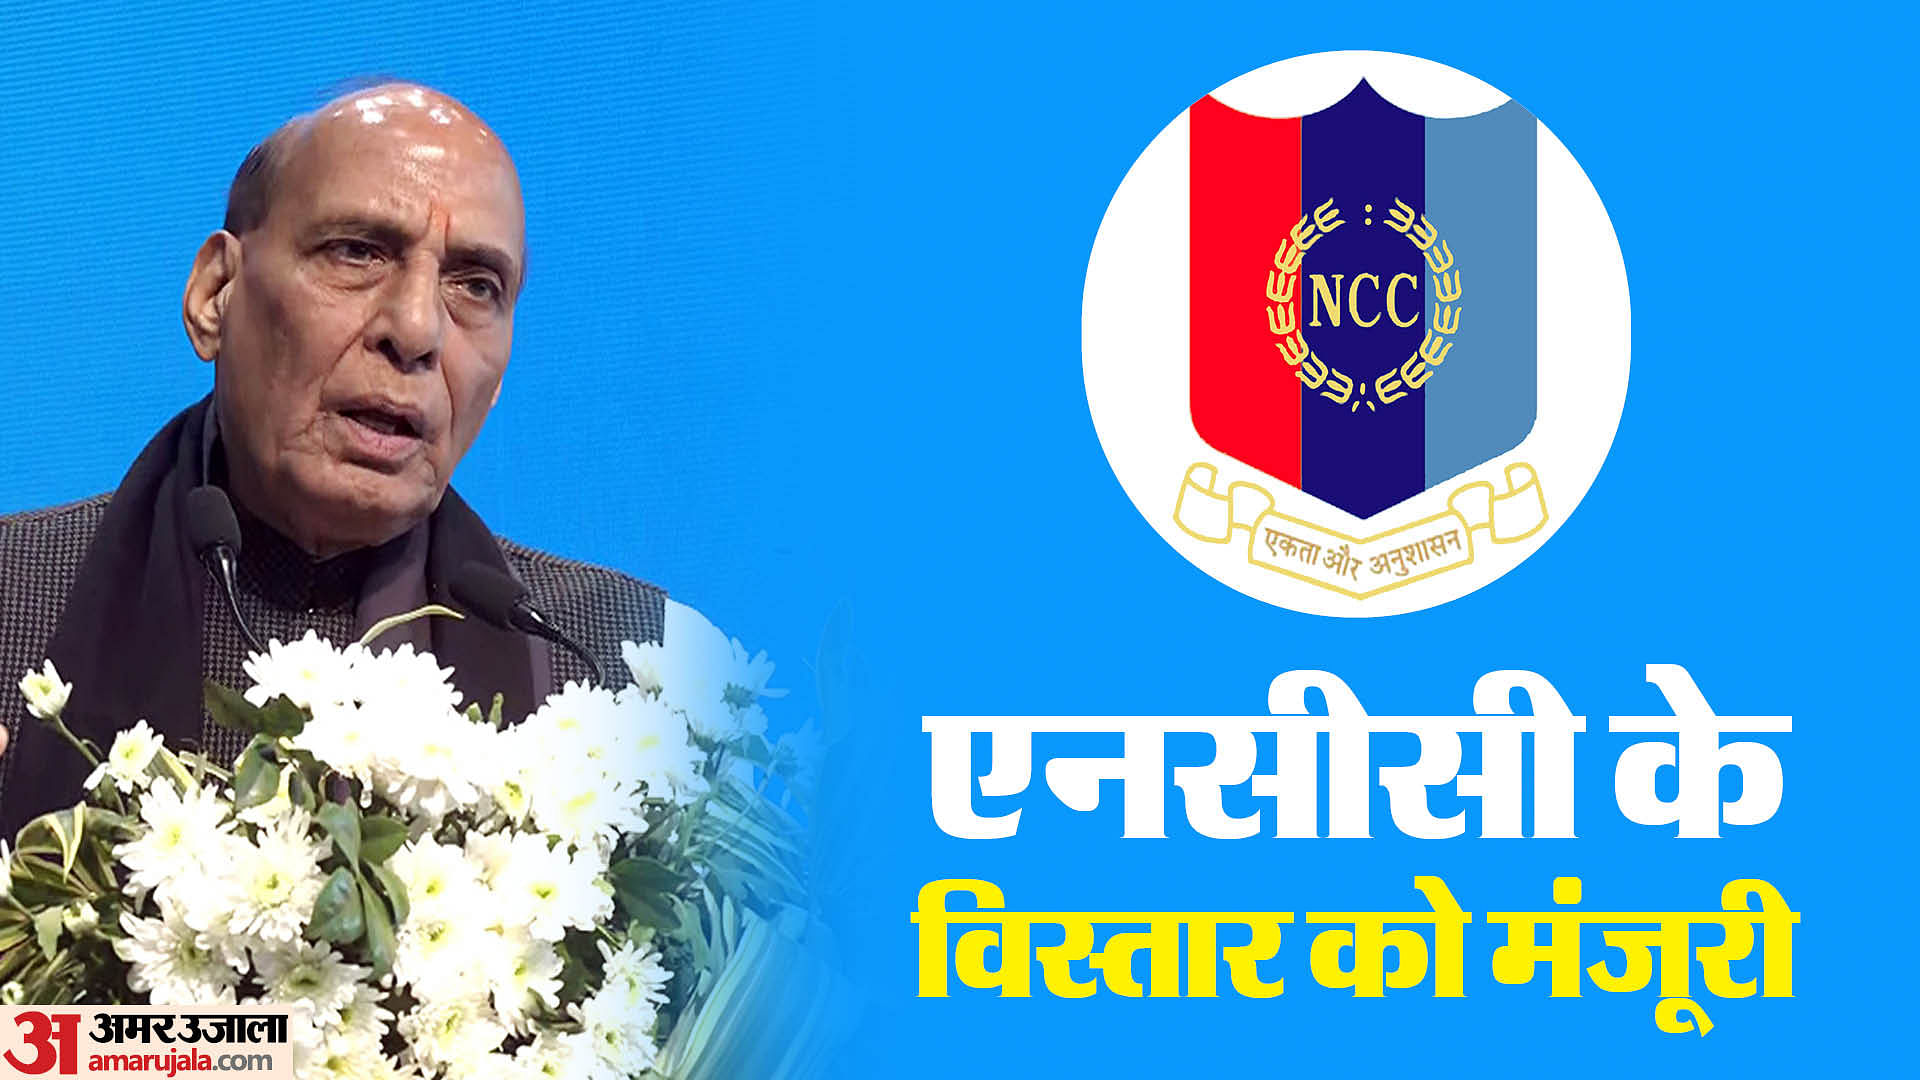 Rajnath Singh approved the proposal of expanding NCC with 3 Lakh Cadet Vacancies